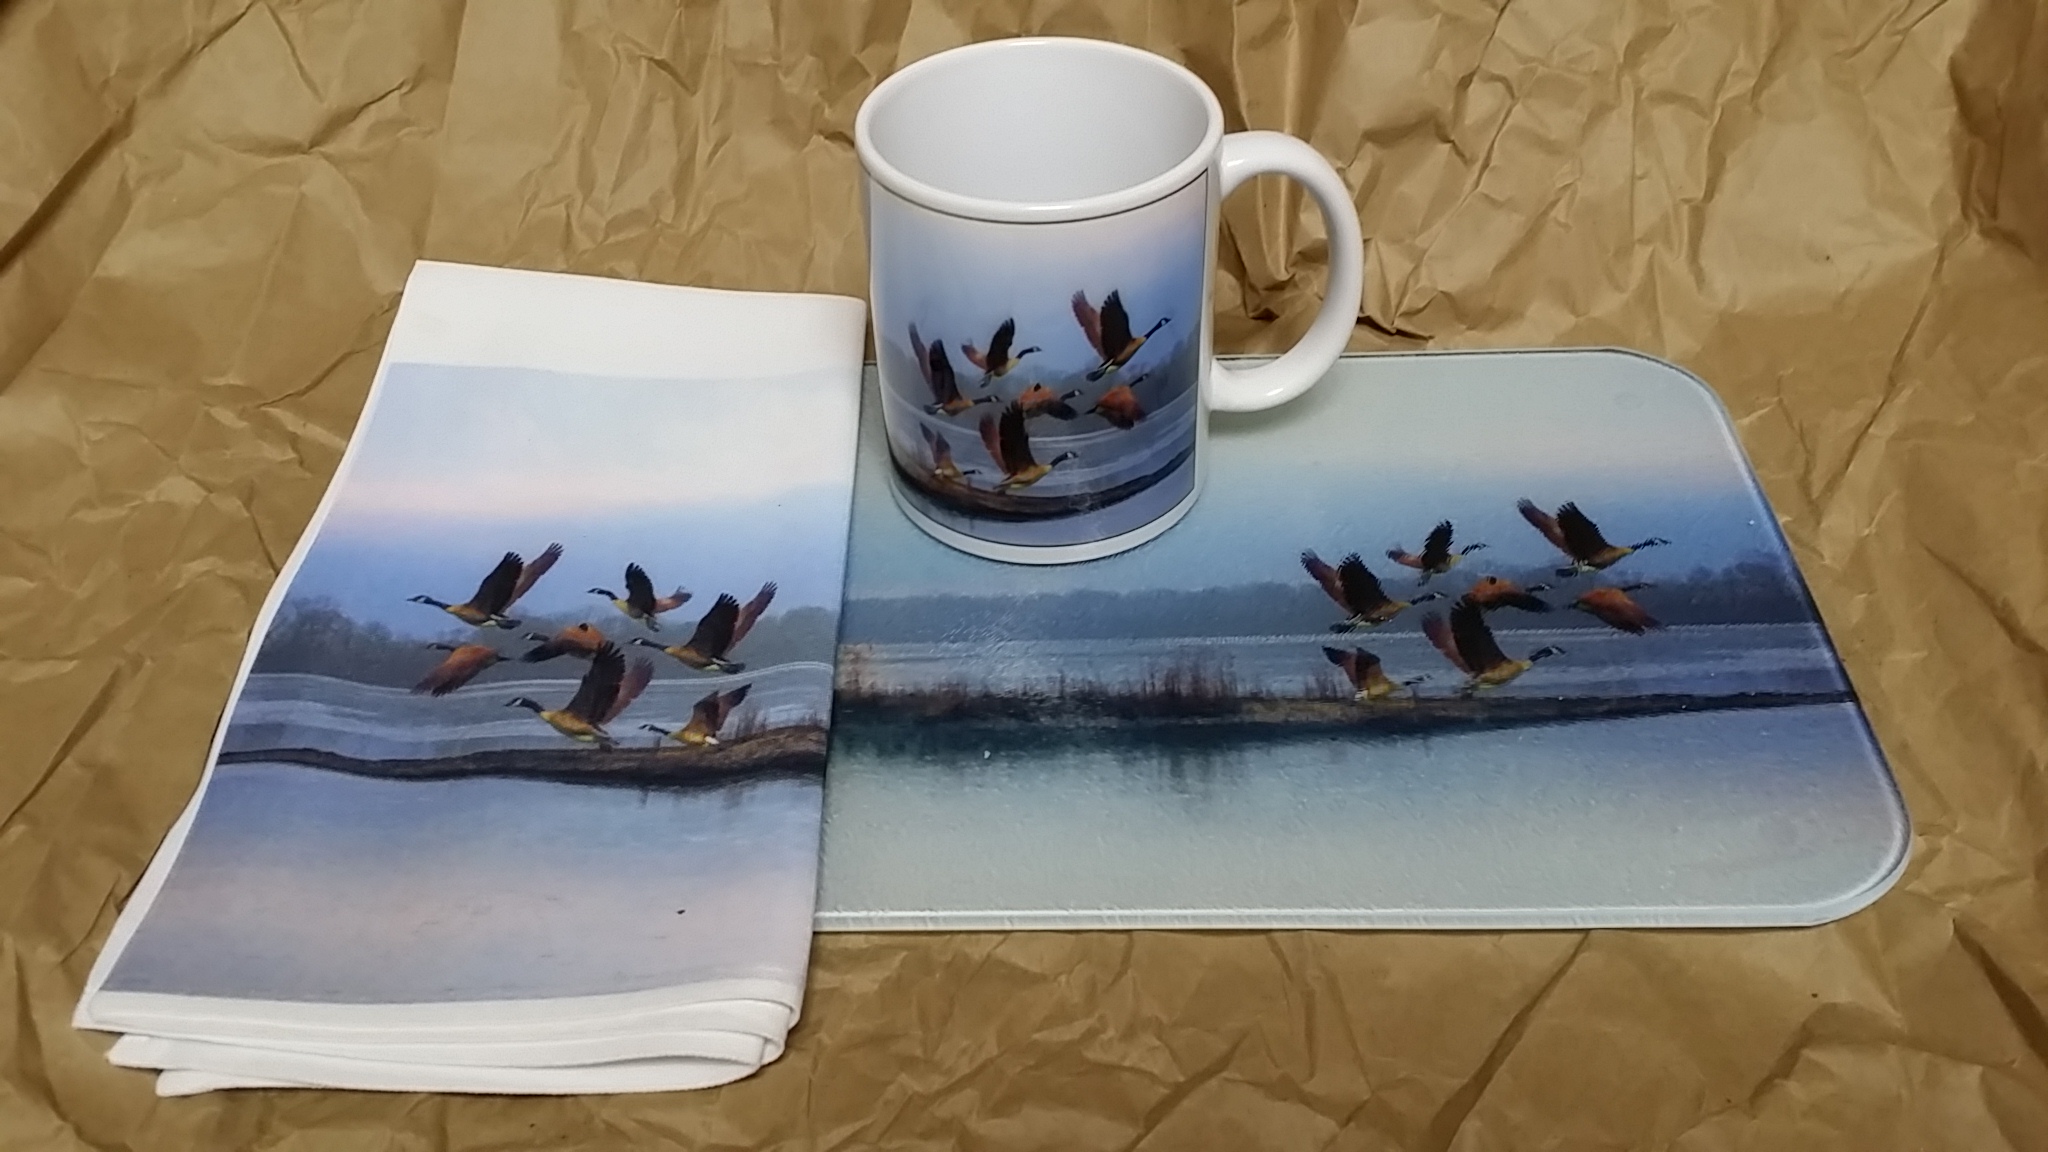 BIRDS IN FLIGHT made with sublimation printing